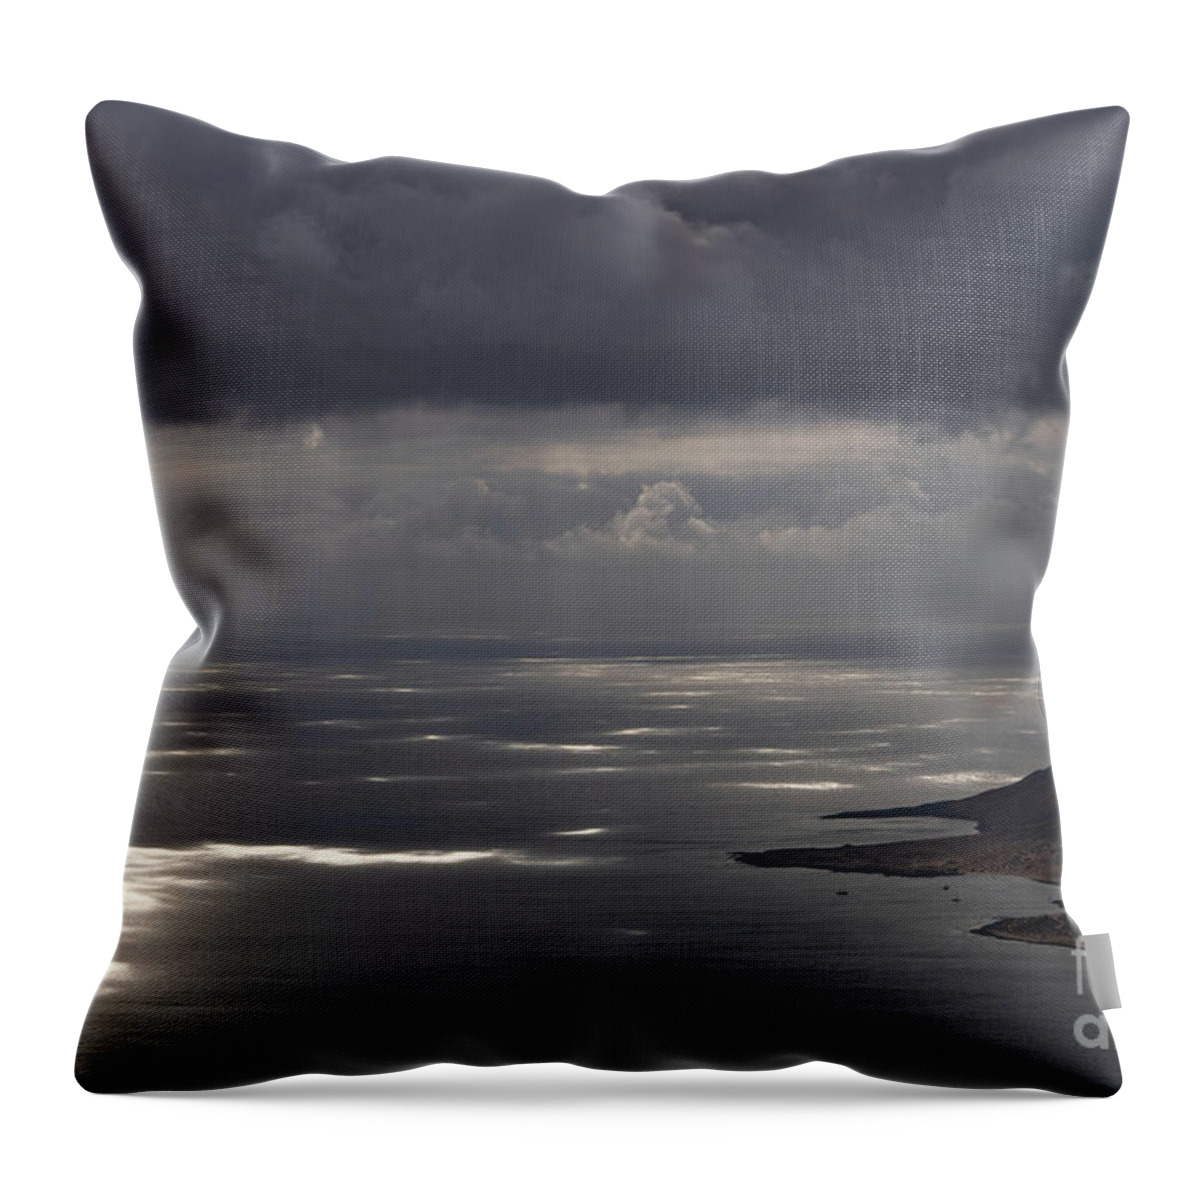 Spain Throw Pillow featuring the photograph Canarias Islands, Lanzarote Landscape, Spain by 